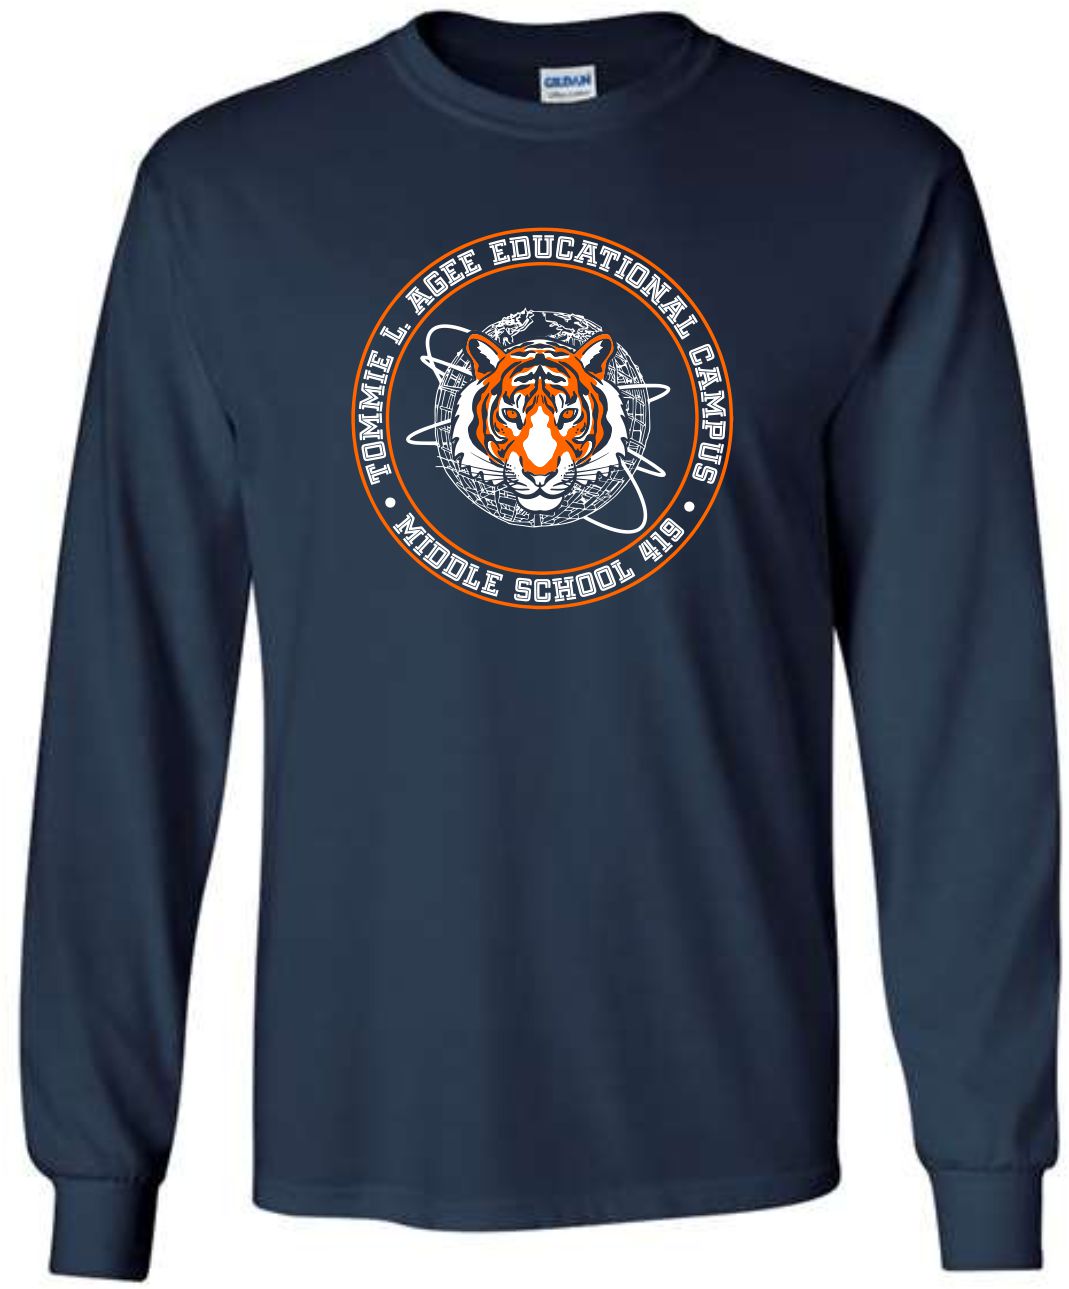 MS419-The Tommie L. Agee Ed. Campus-Long Sleeve Tee